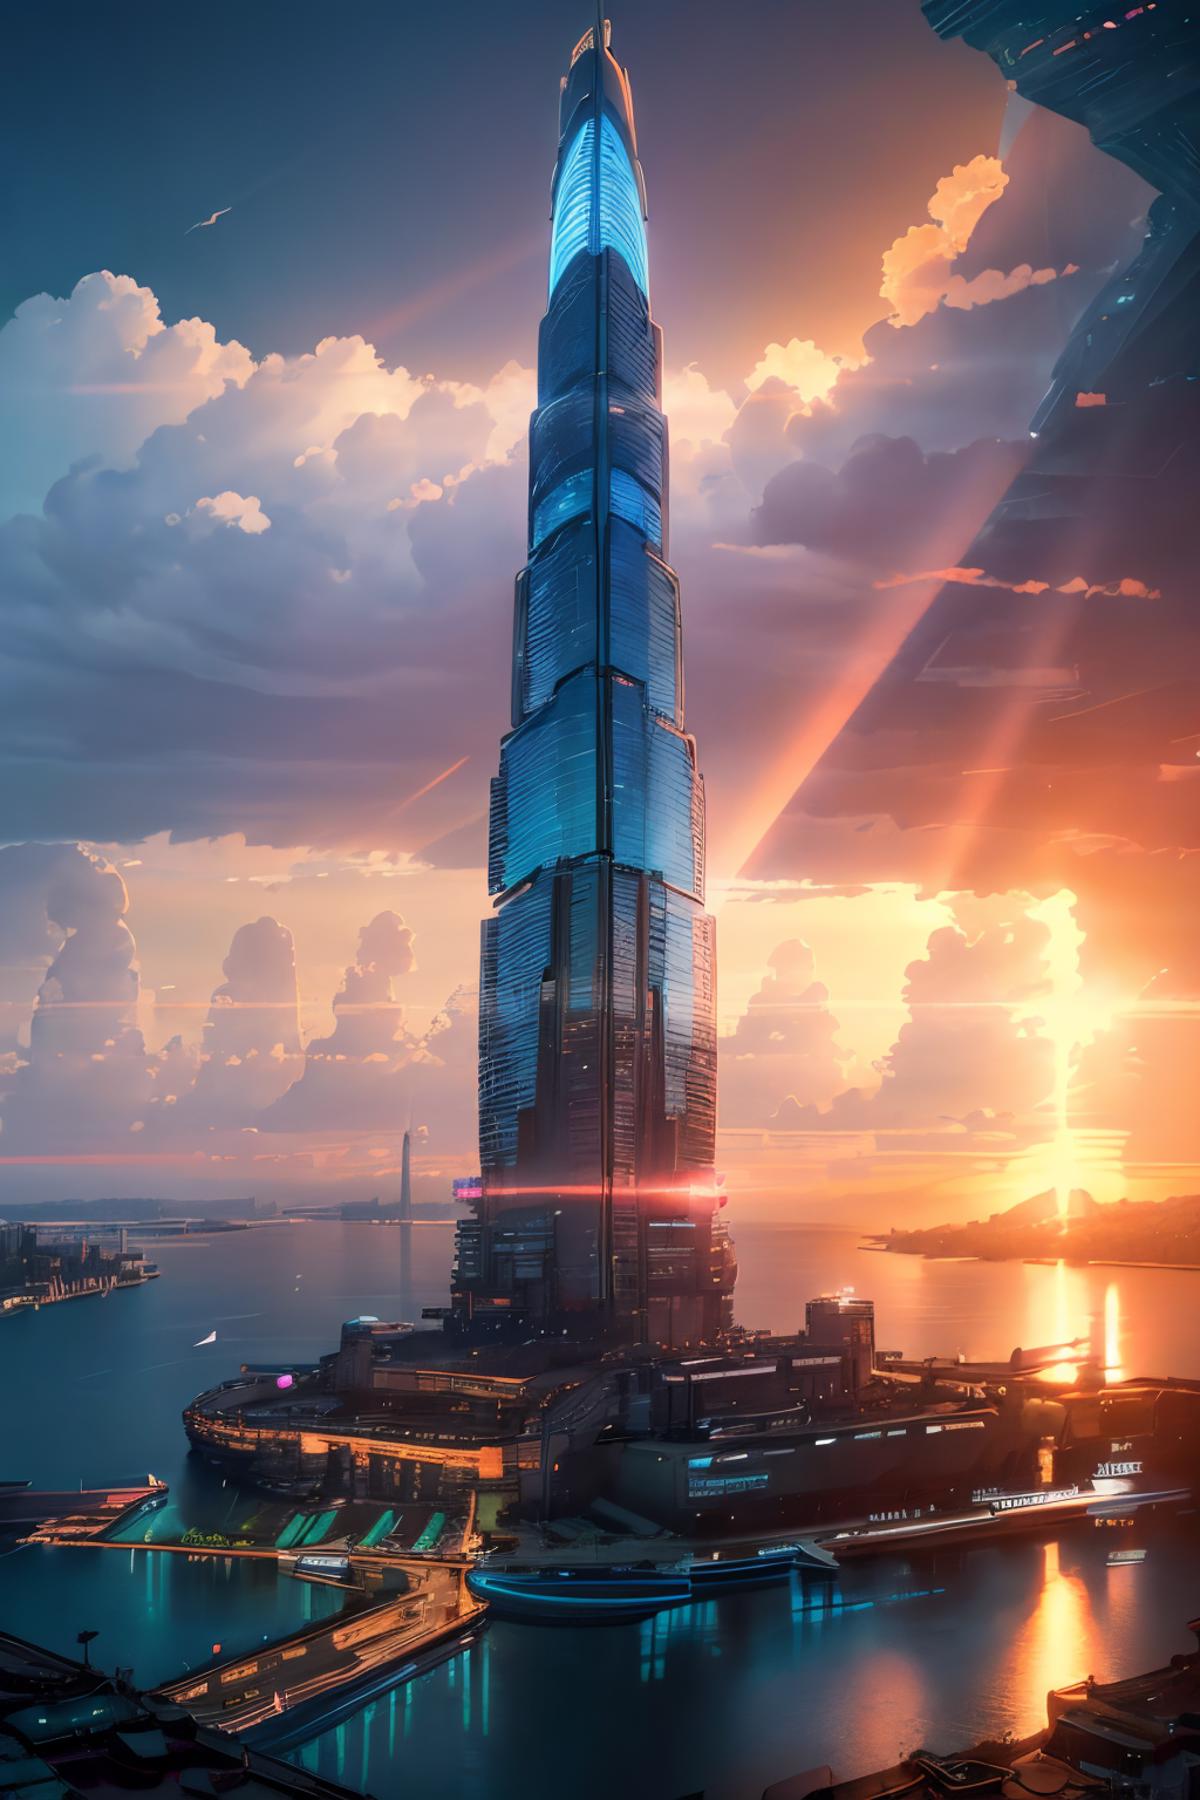 A futuristic city with a tall tower and a sunset